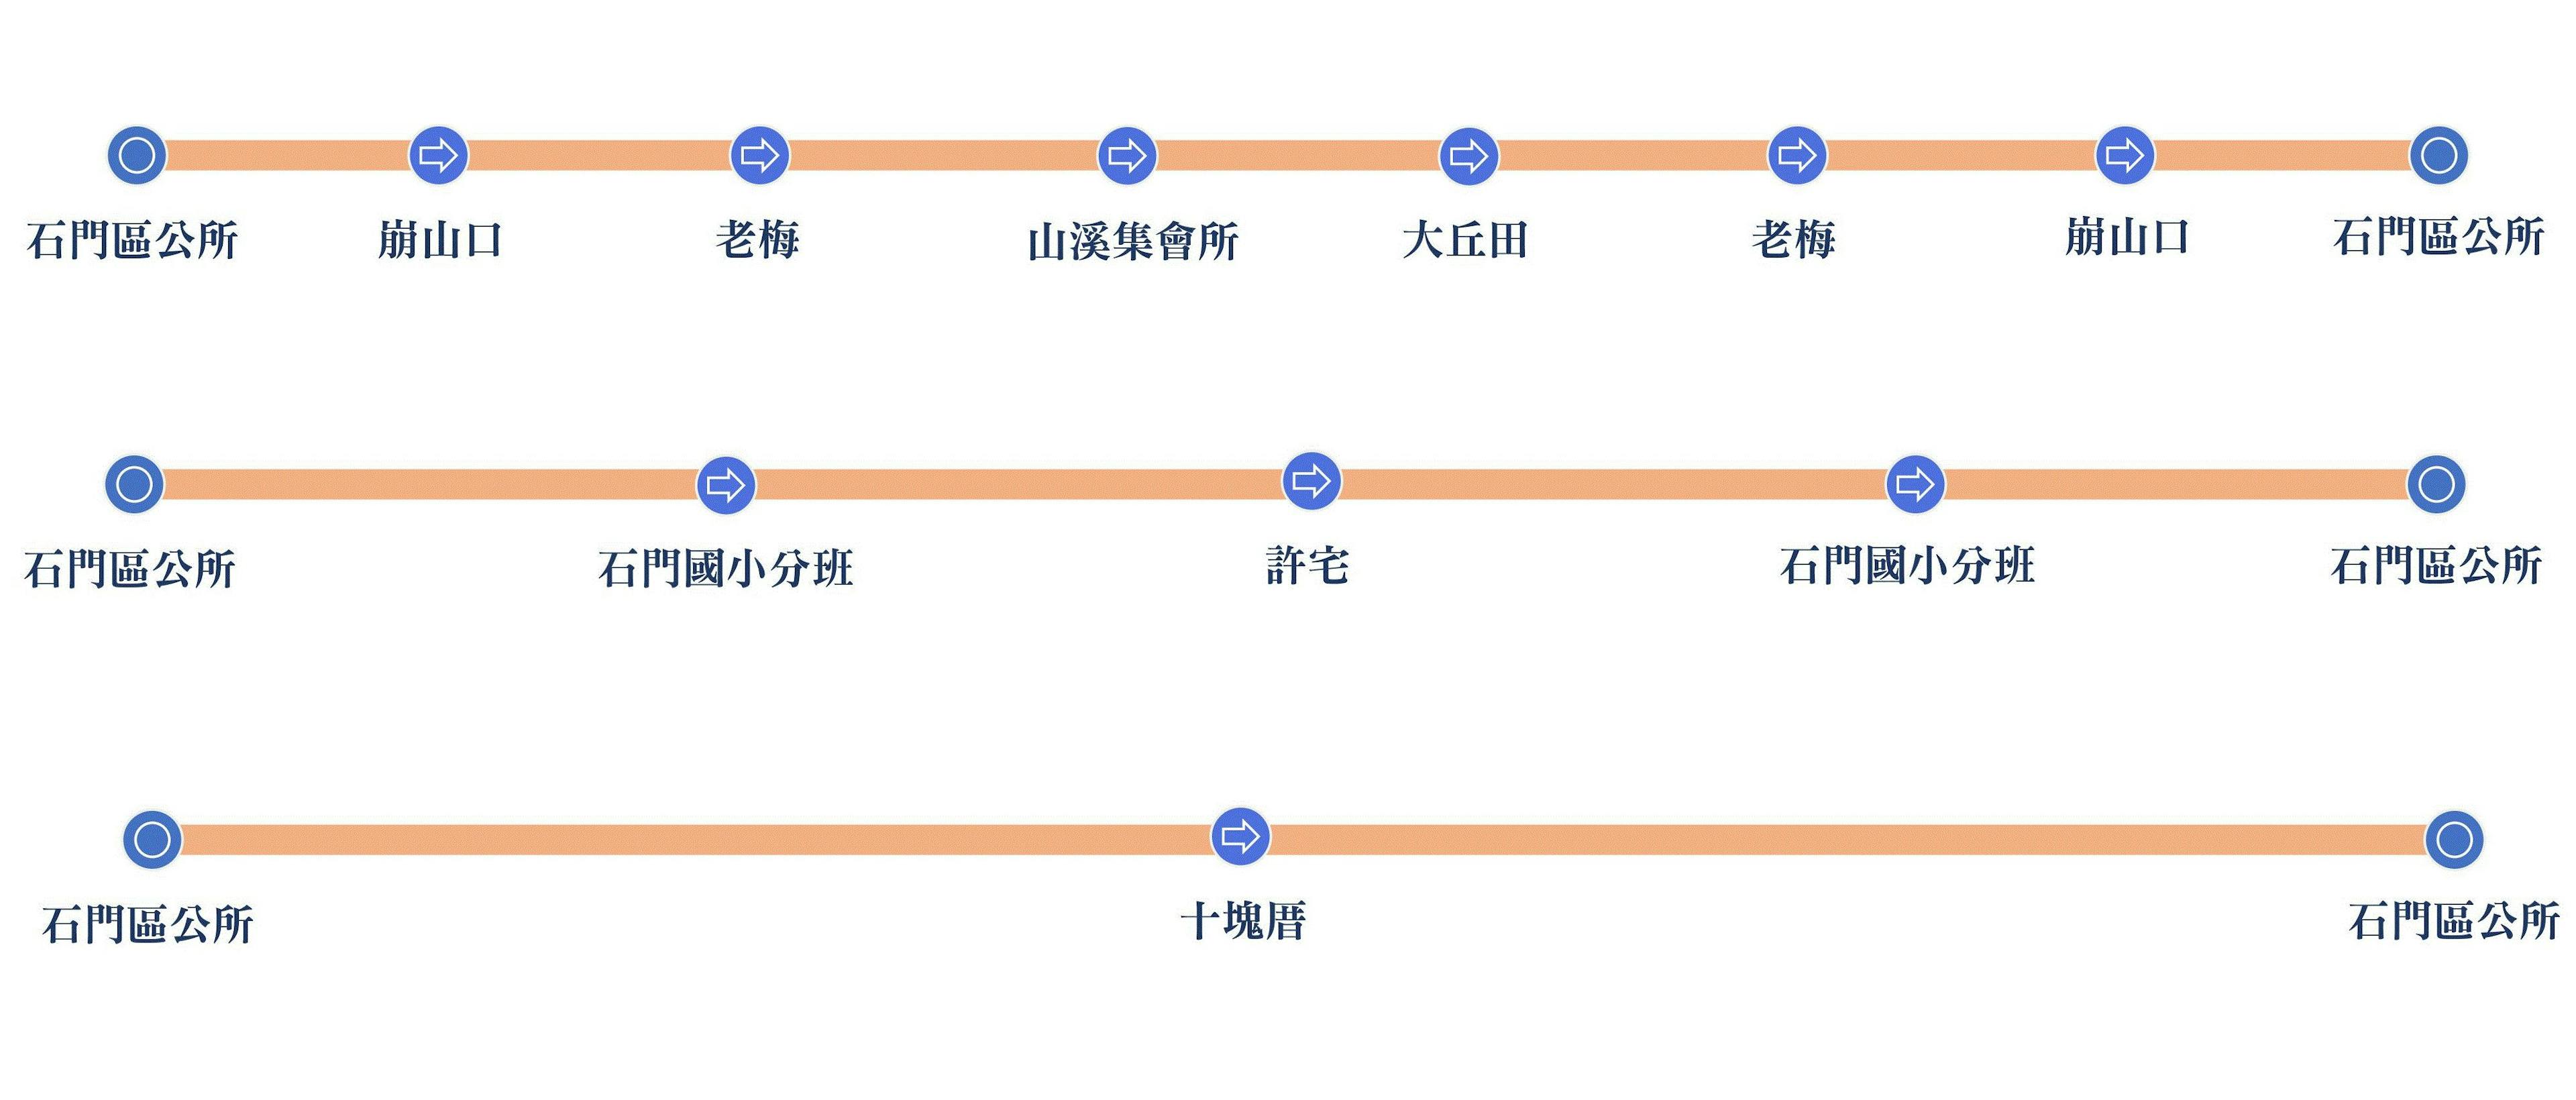 F151-0730Route Map-新北市 Bus